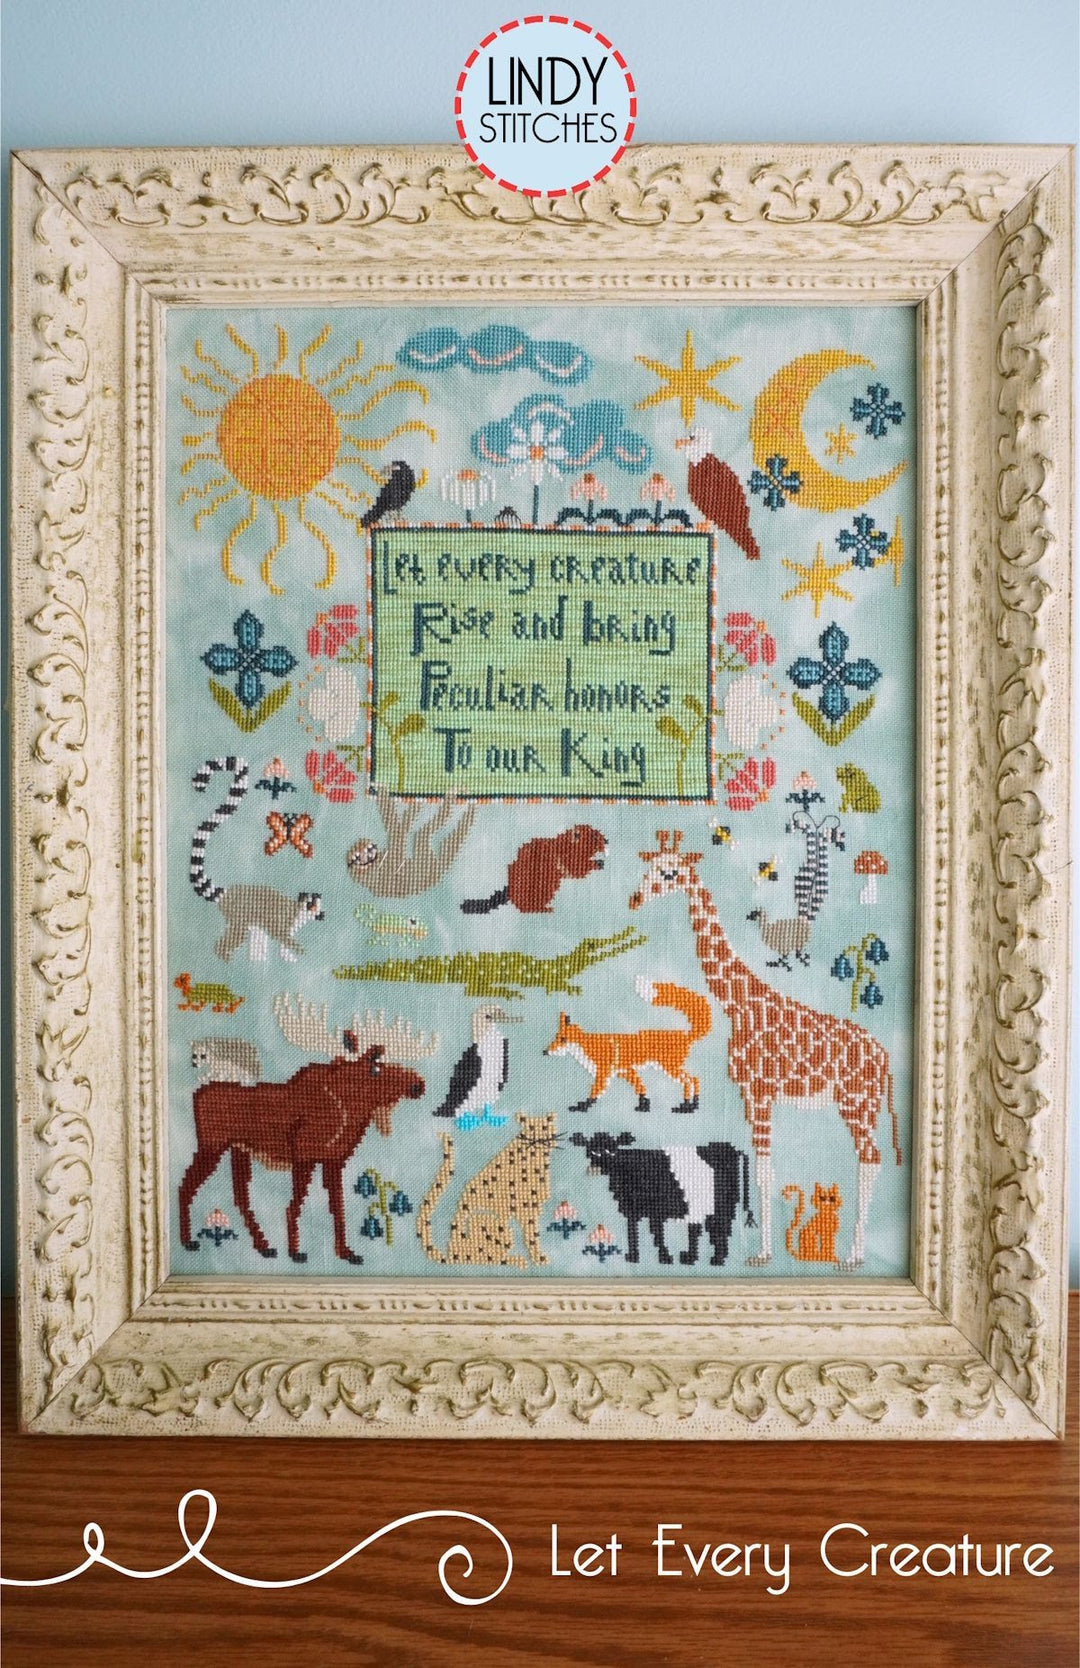 Let Every Creature | Lindy Stitches